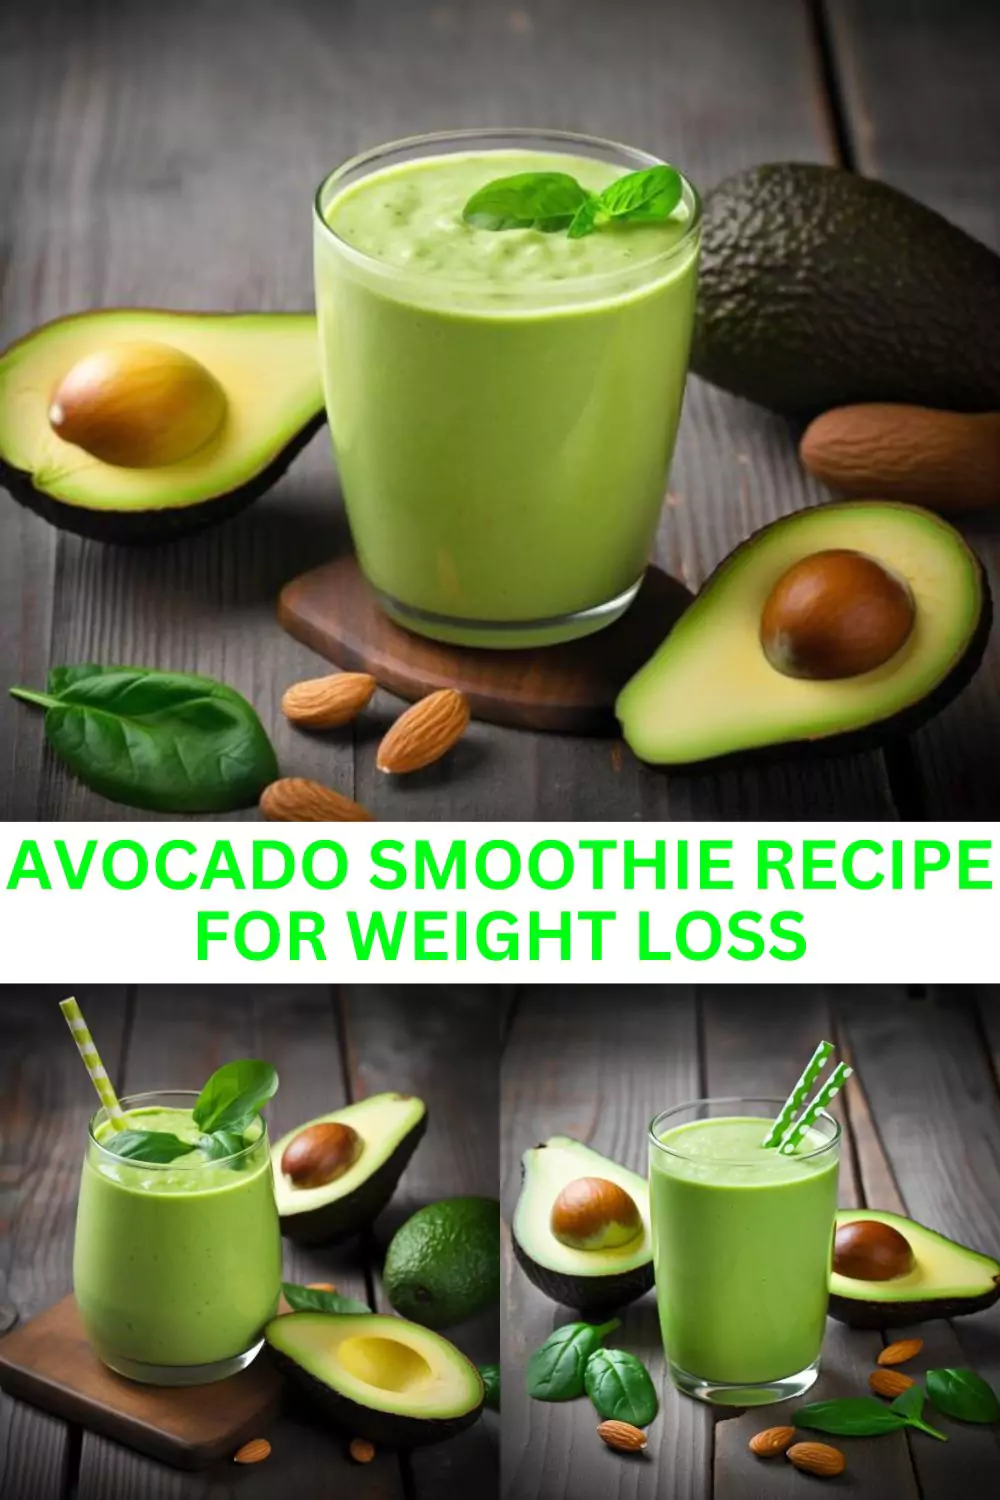 Best Avocado Smoothie Recipe For Weight Loss